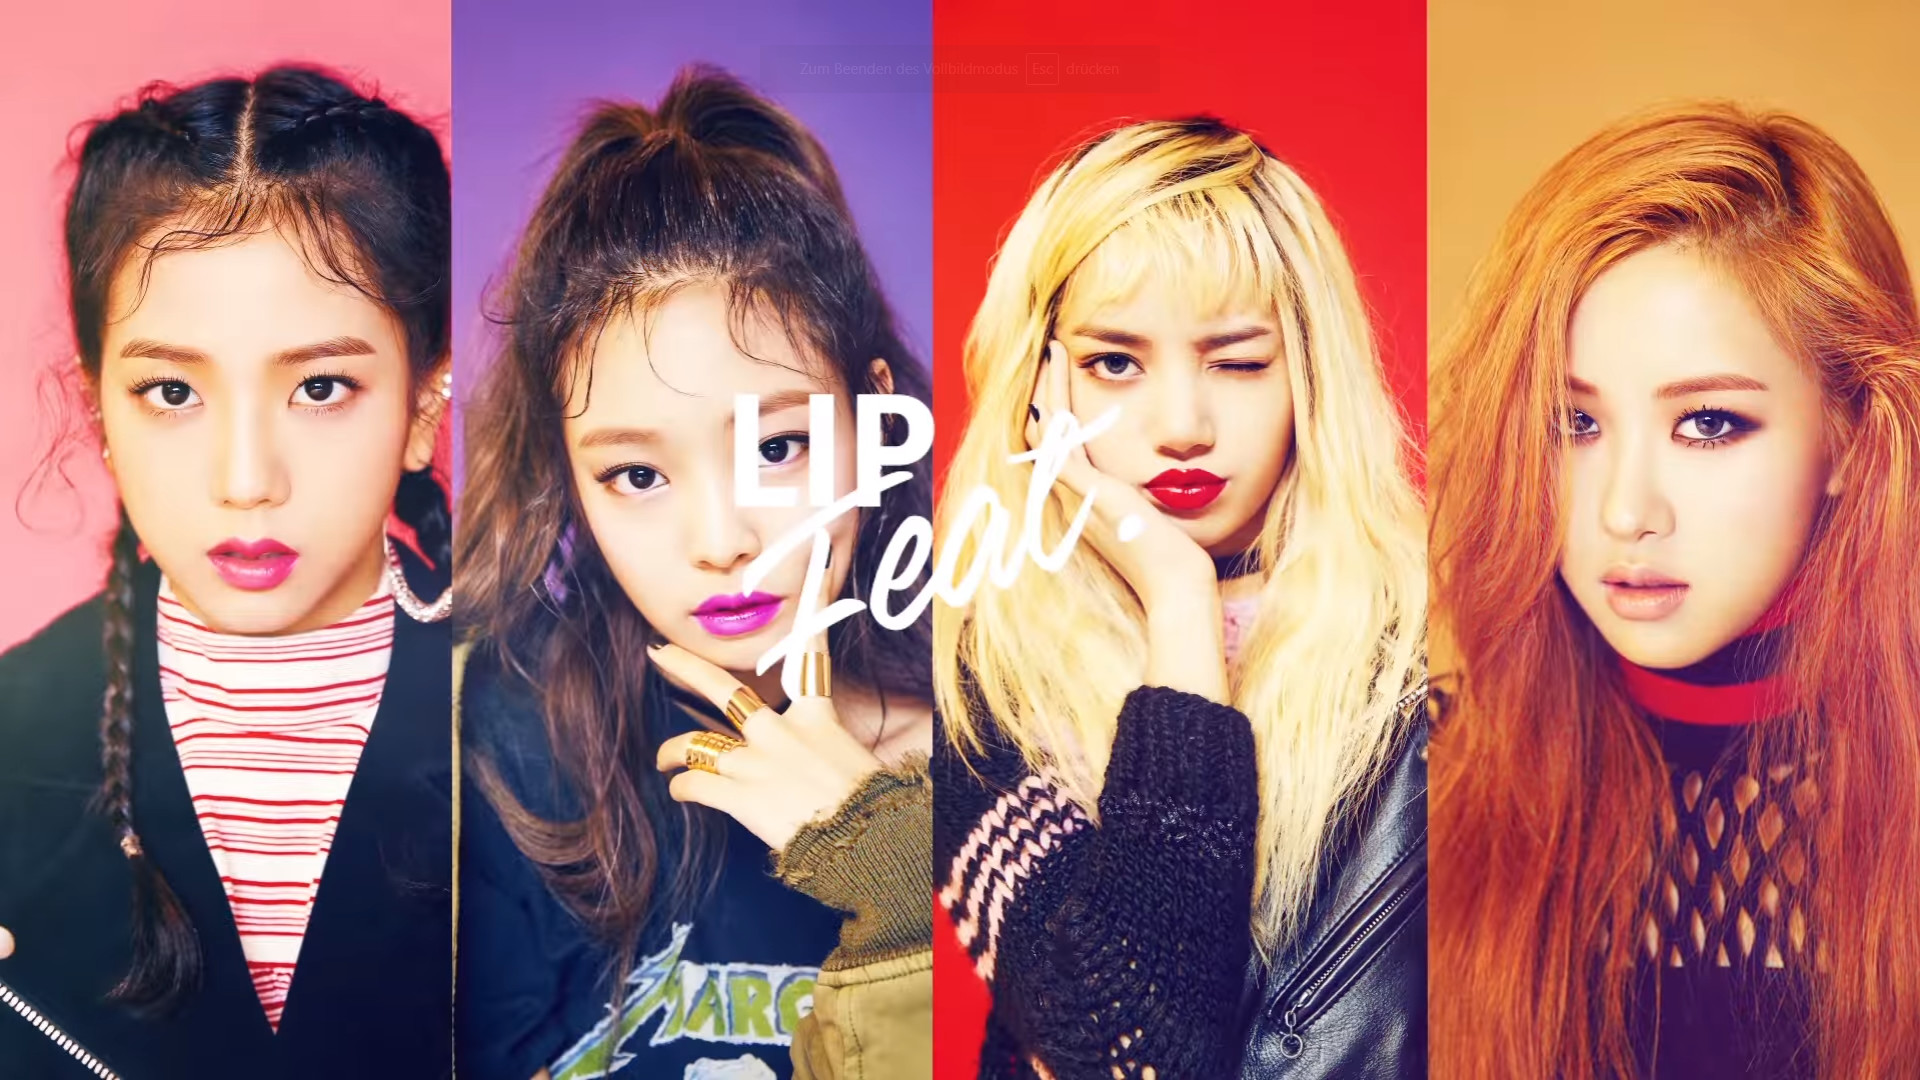 Free download Blackpink Wallpapers 63 images [1920x1080] for your Desktop,  Mobile & Tablet | Explore 22+ Jisoo And Jennie Blackpink Wallpapers | BLACKPINK  Wallpapers, BTS And Blackpink Wallpapers, Kim Jisoo BLACKPINK Wallpapers